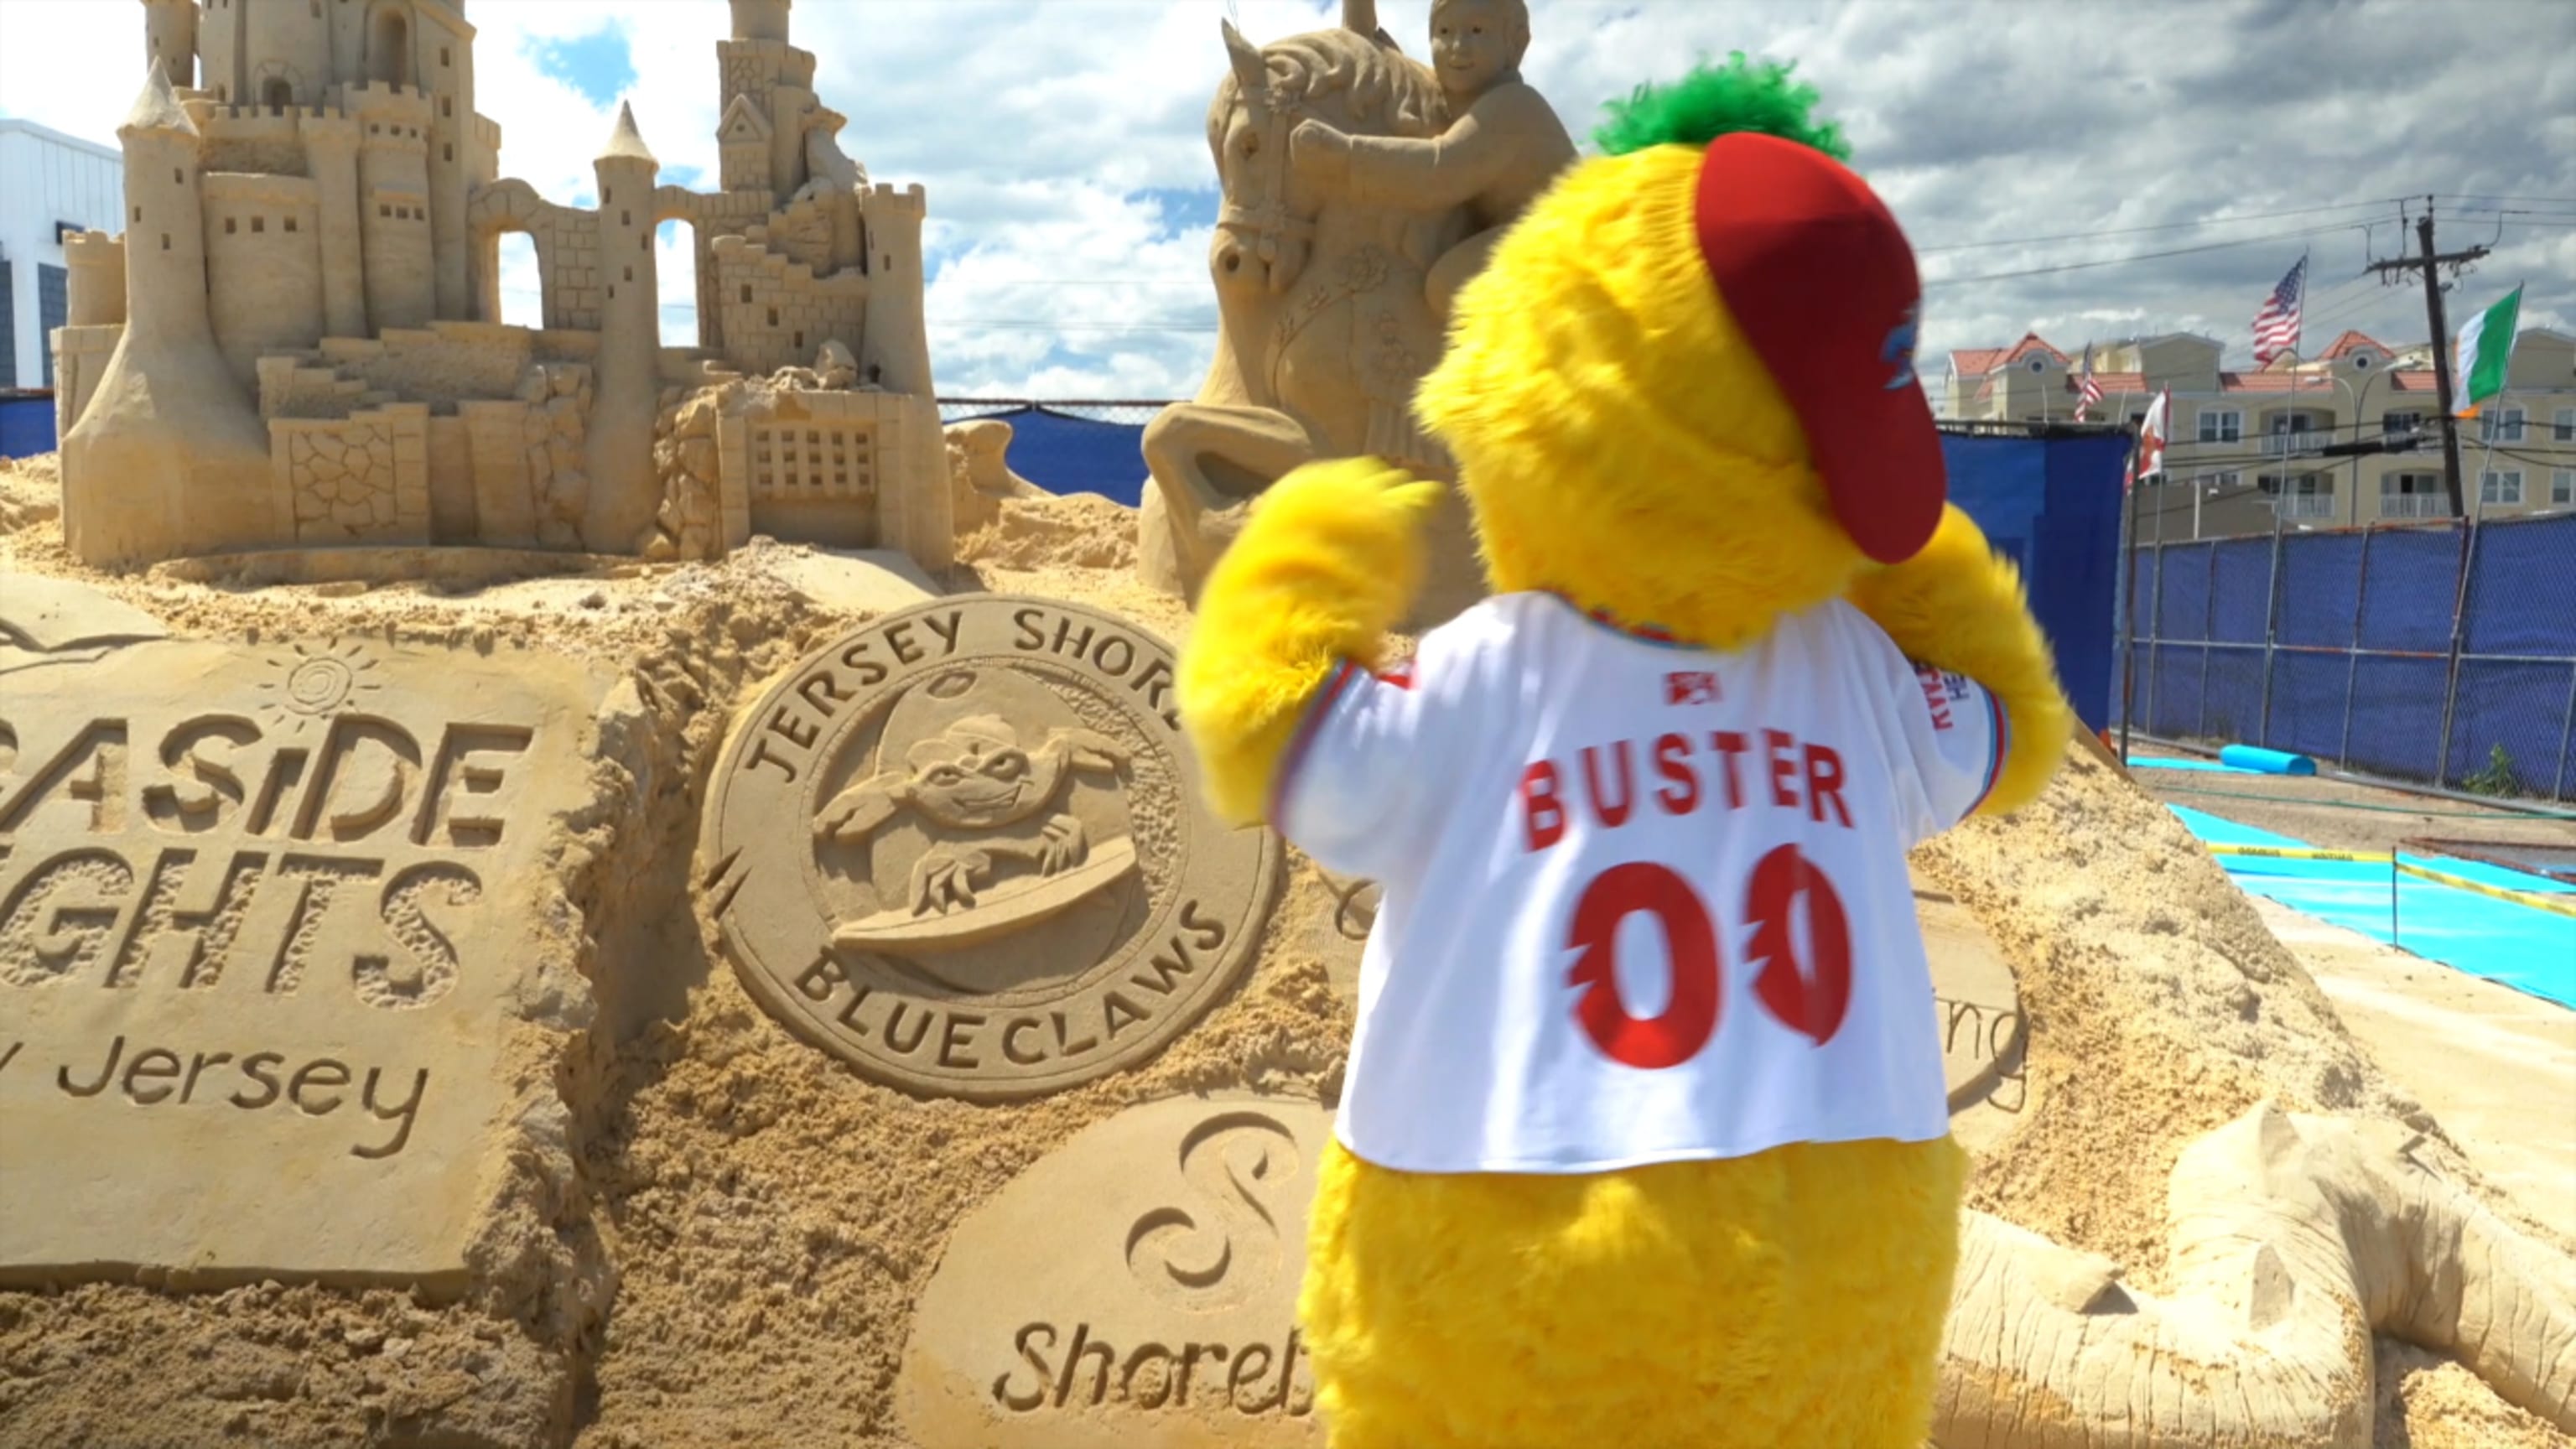 Jersey Shore BlueClaws - Buster is READY for baseball in 2021